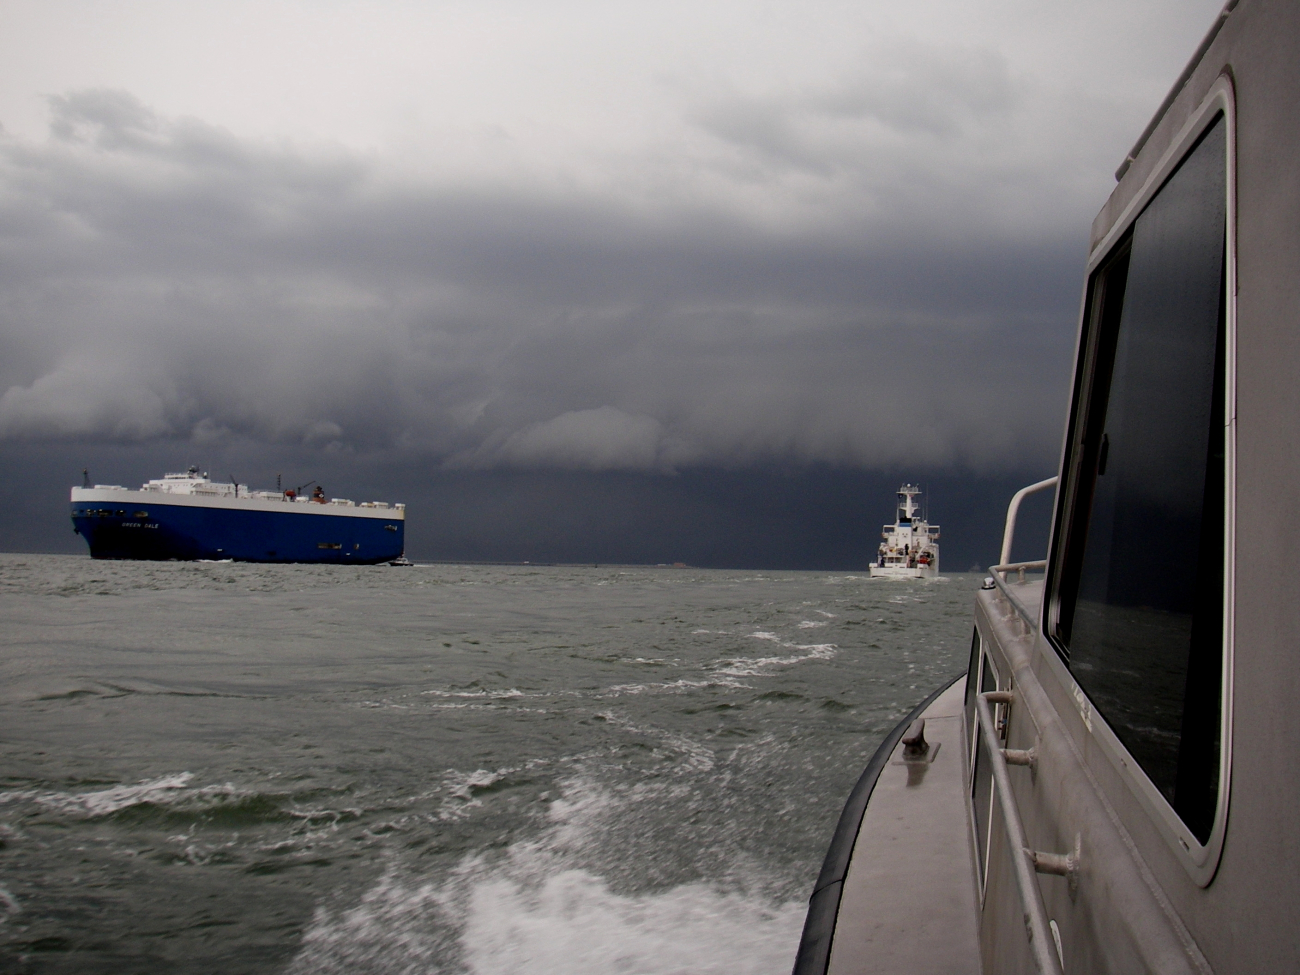 Launch 3102 following NOAA Ship THOMAS JEFFERSON into saferwaters as a heavy thunderstorm bears down